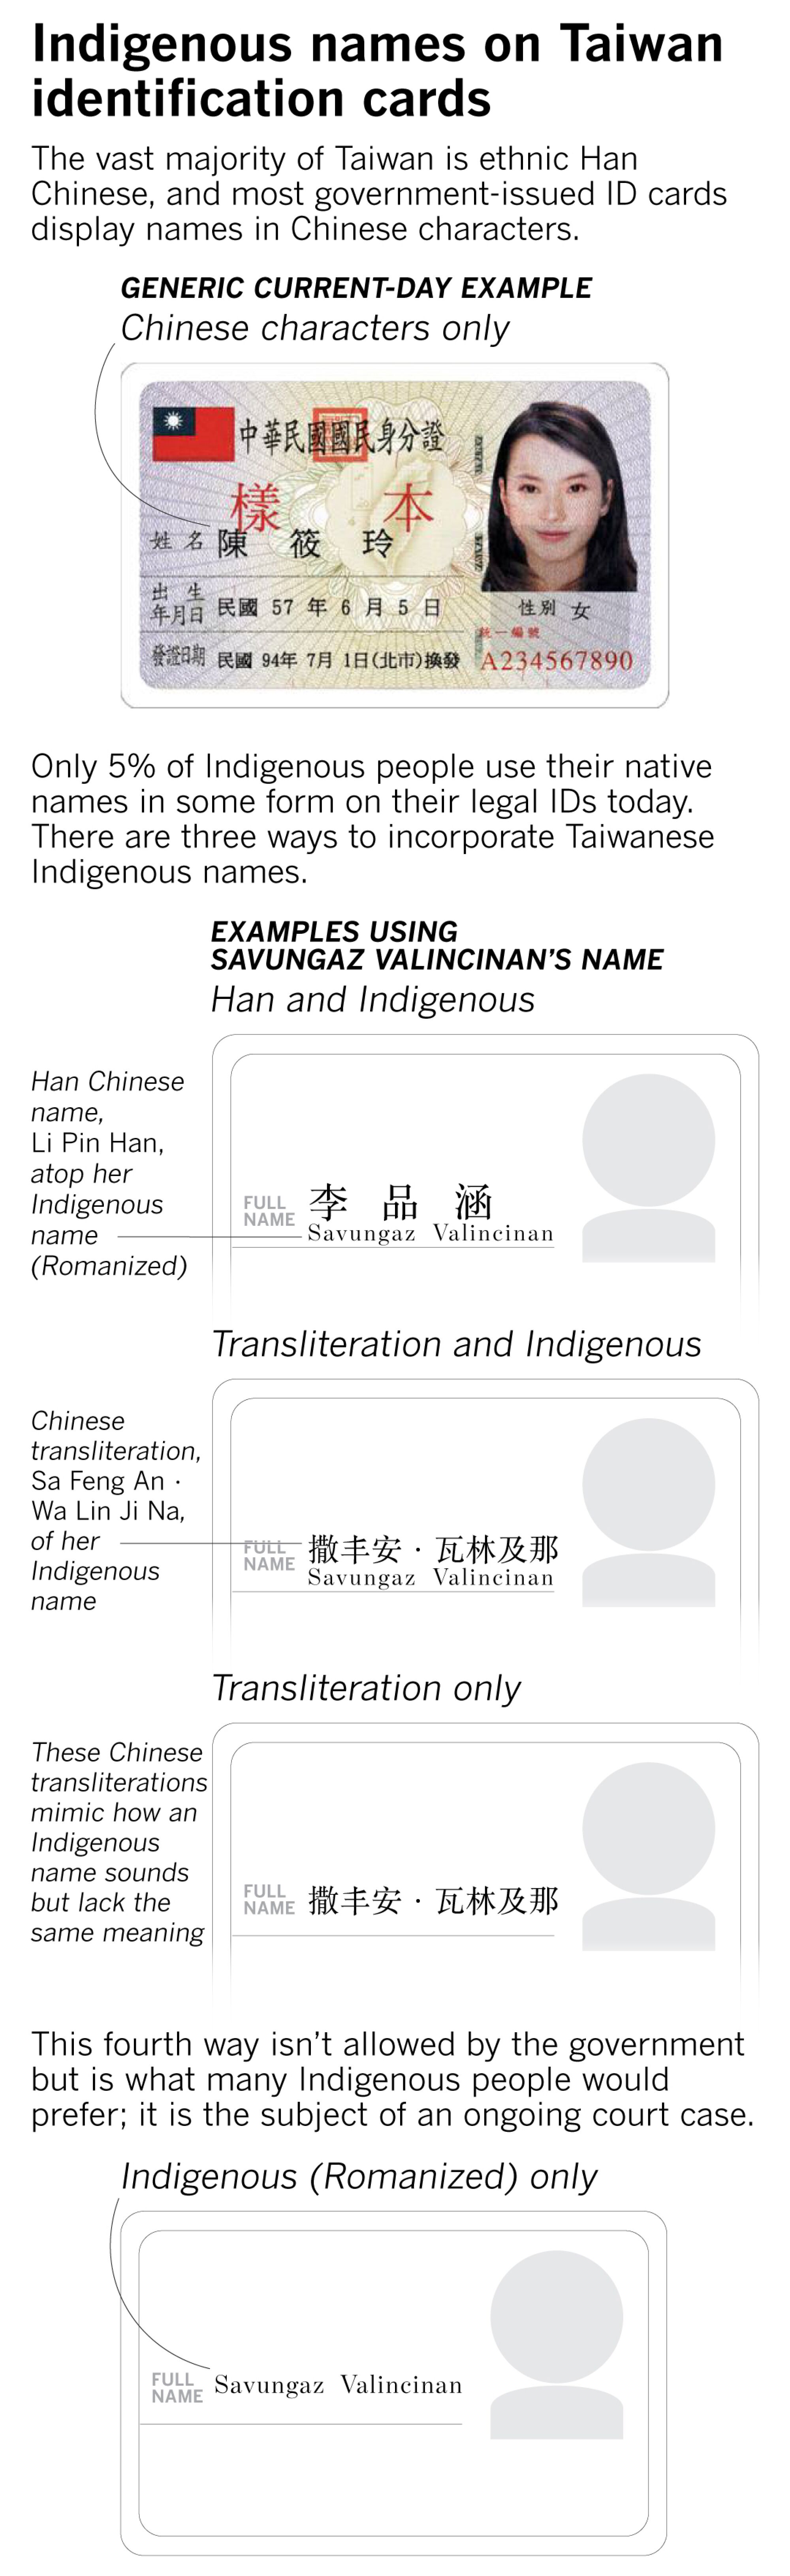 Only 5% of Indigenous Taiwanese use native names on IDs today and there's no option to display only their Indigenous name